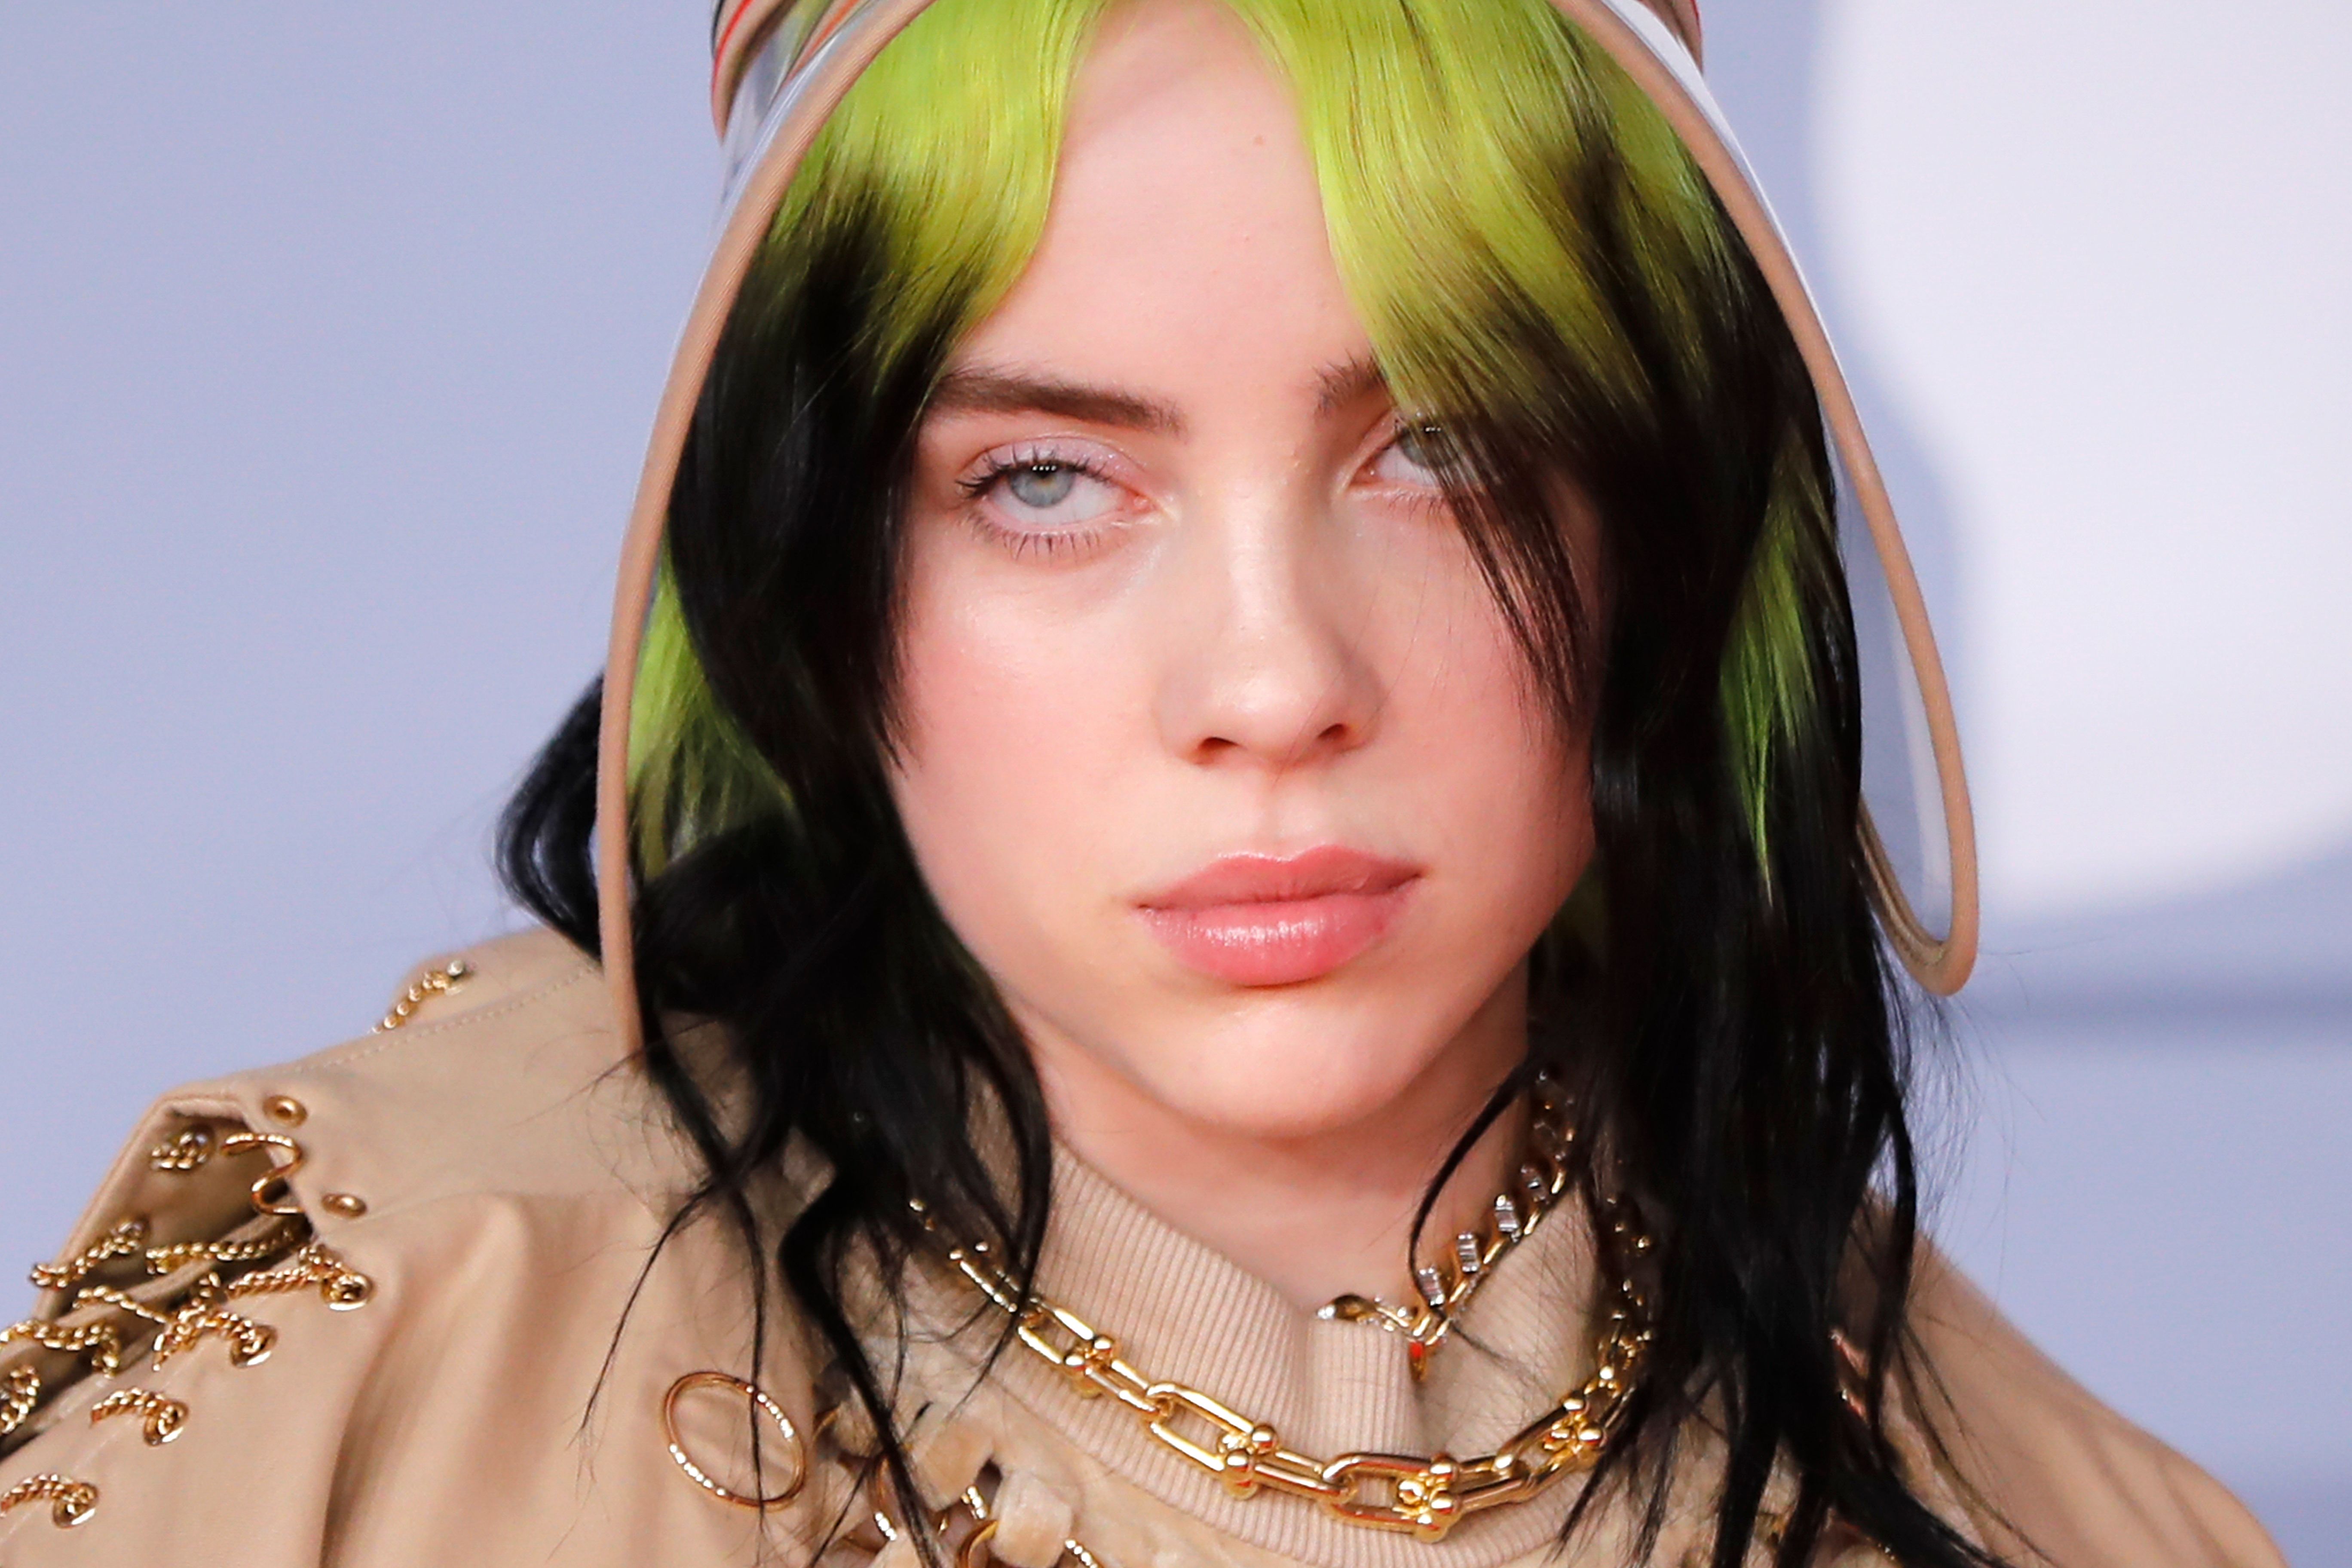 Billie Eilish Reveals the Meaning Behind Her "Bad Guy" Tattoo - wide 5